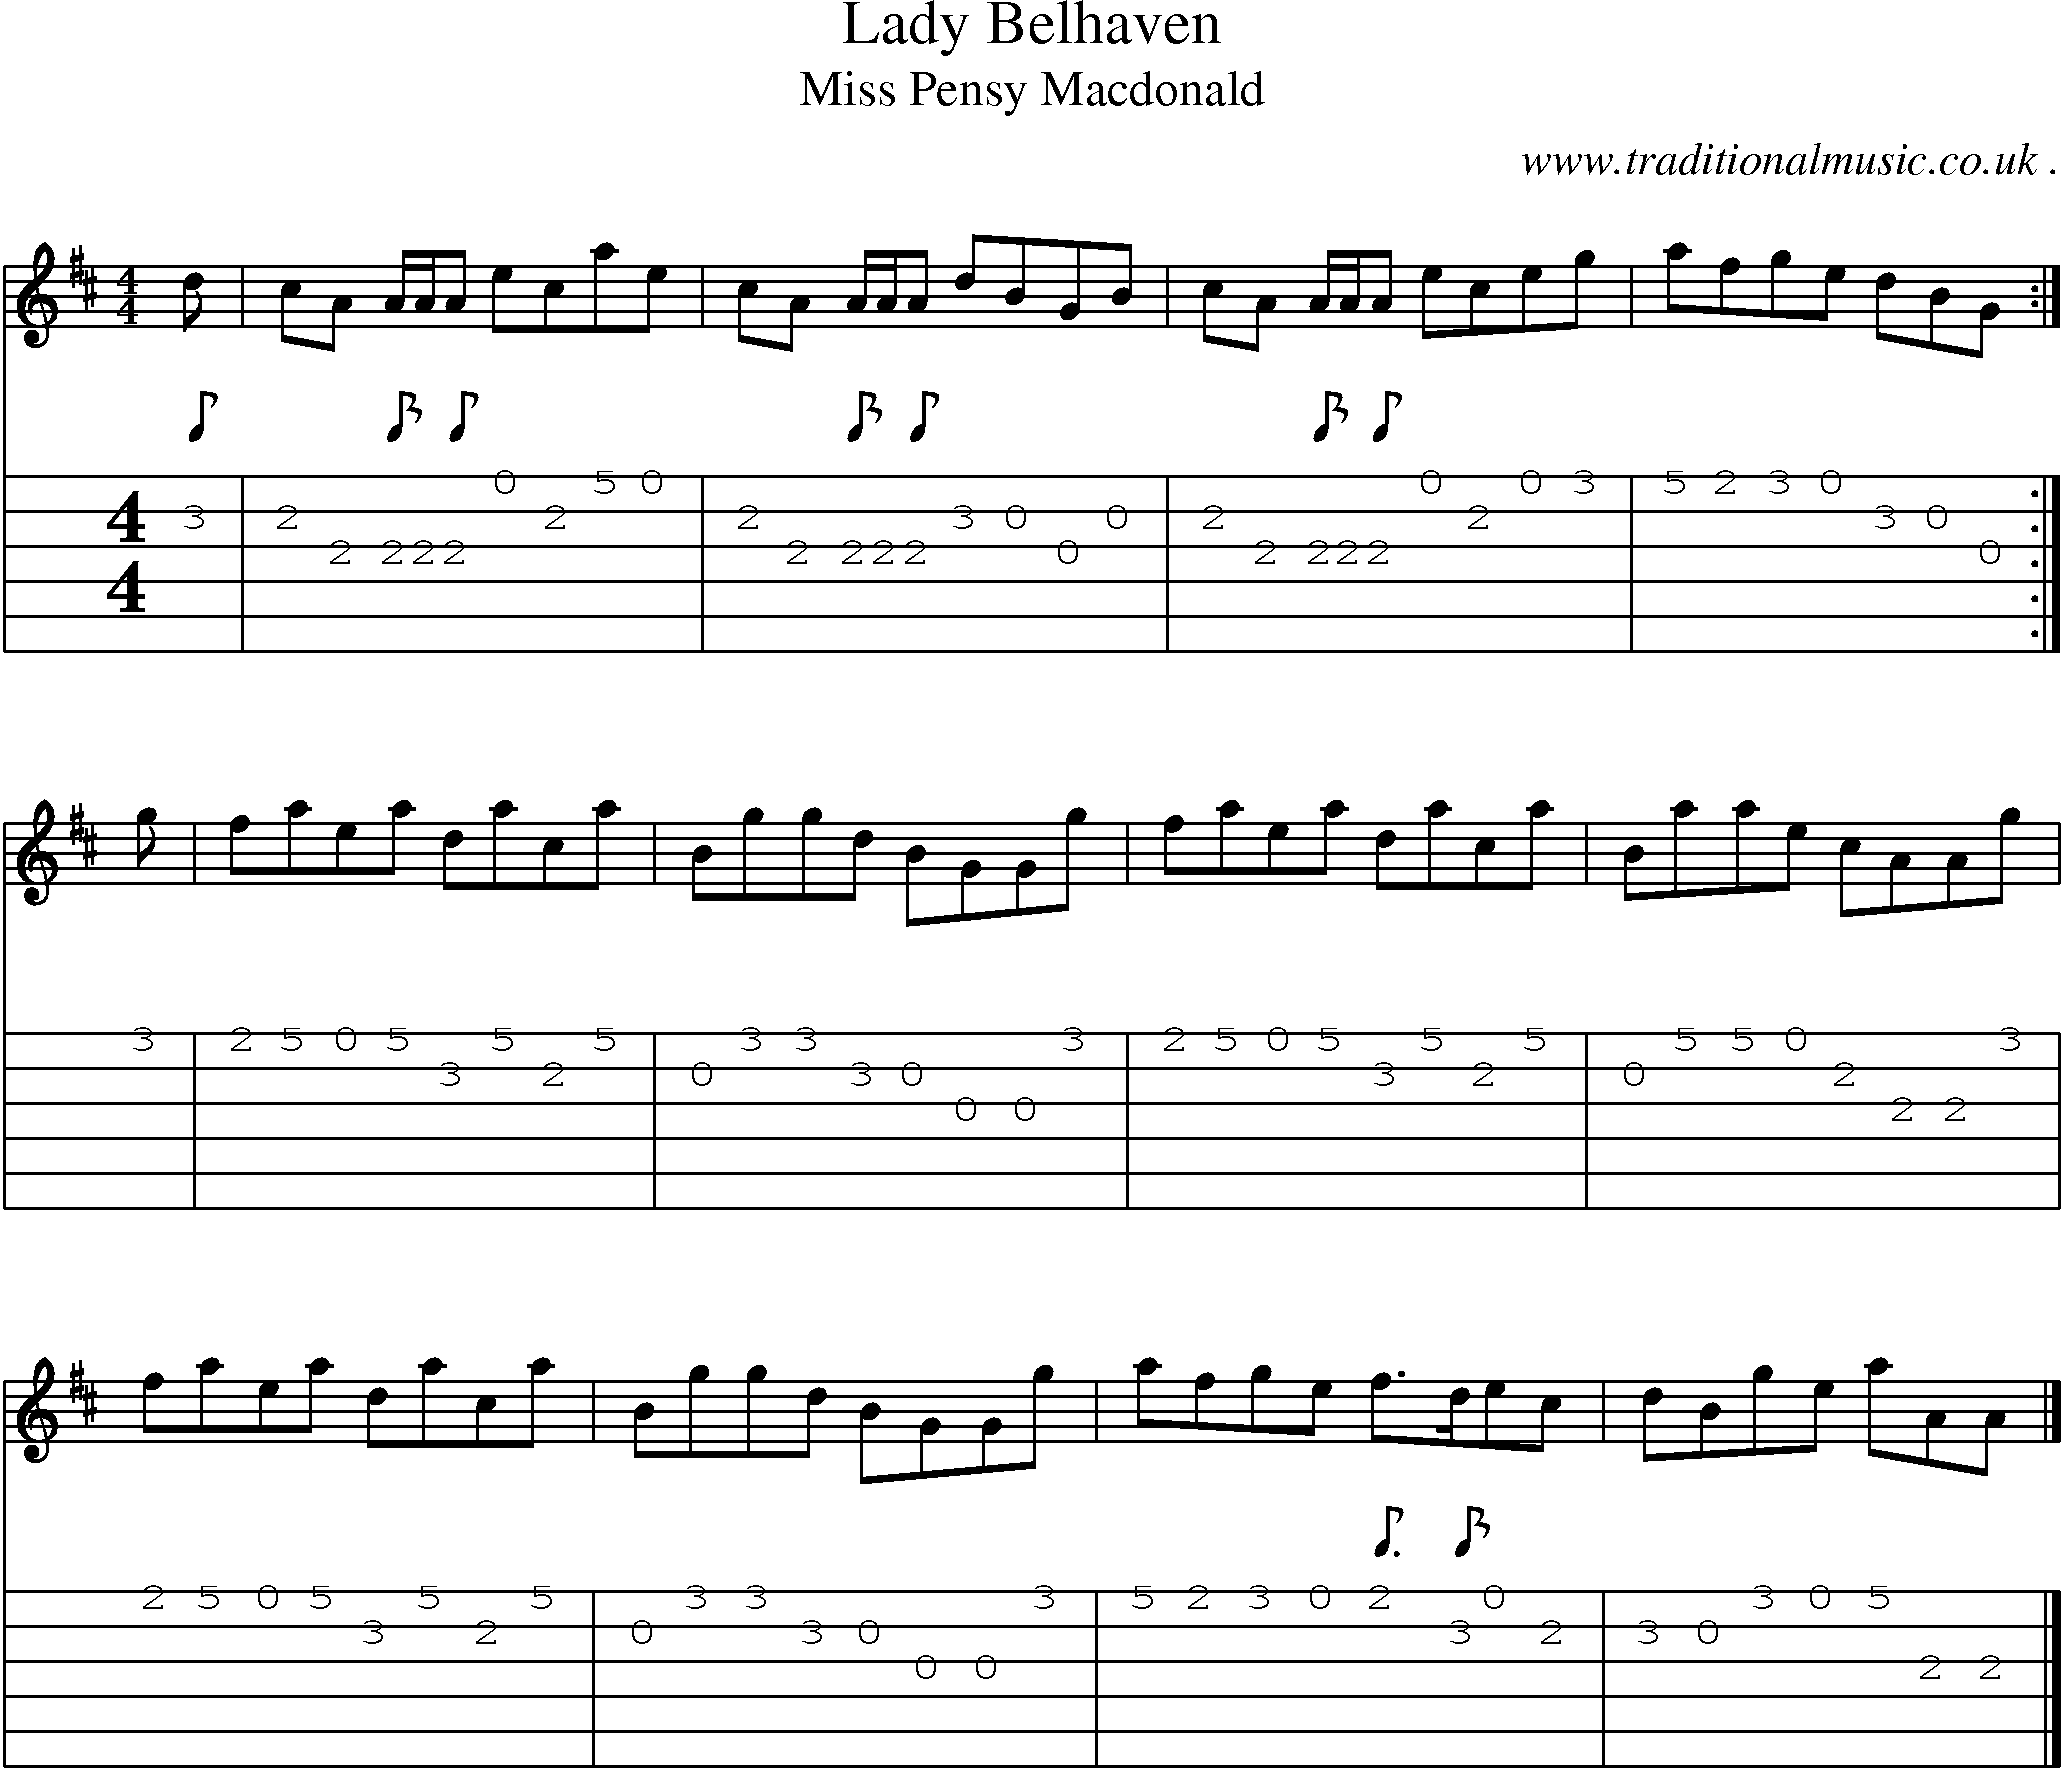 Sheet-music  score, Chords and Guitar Tabs for Lady Belhaven